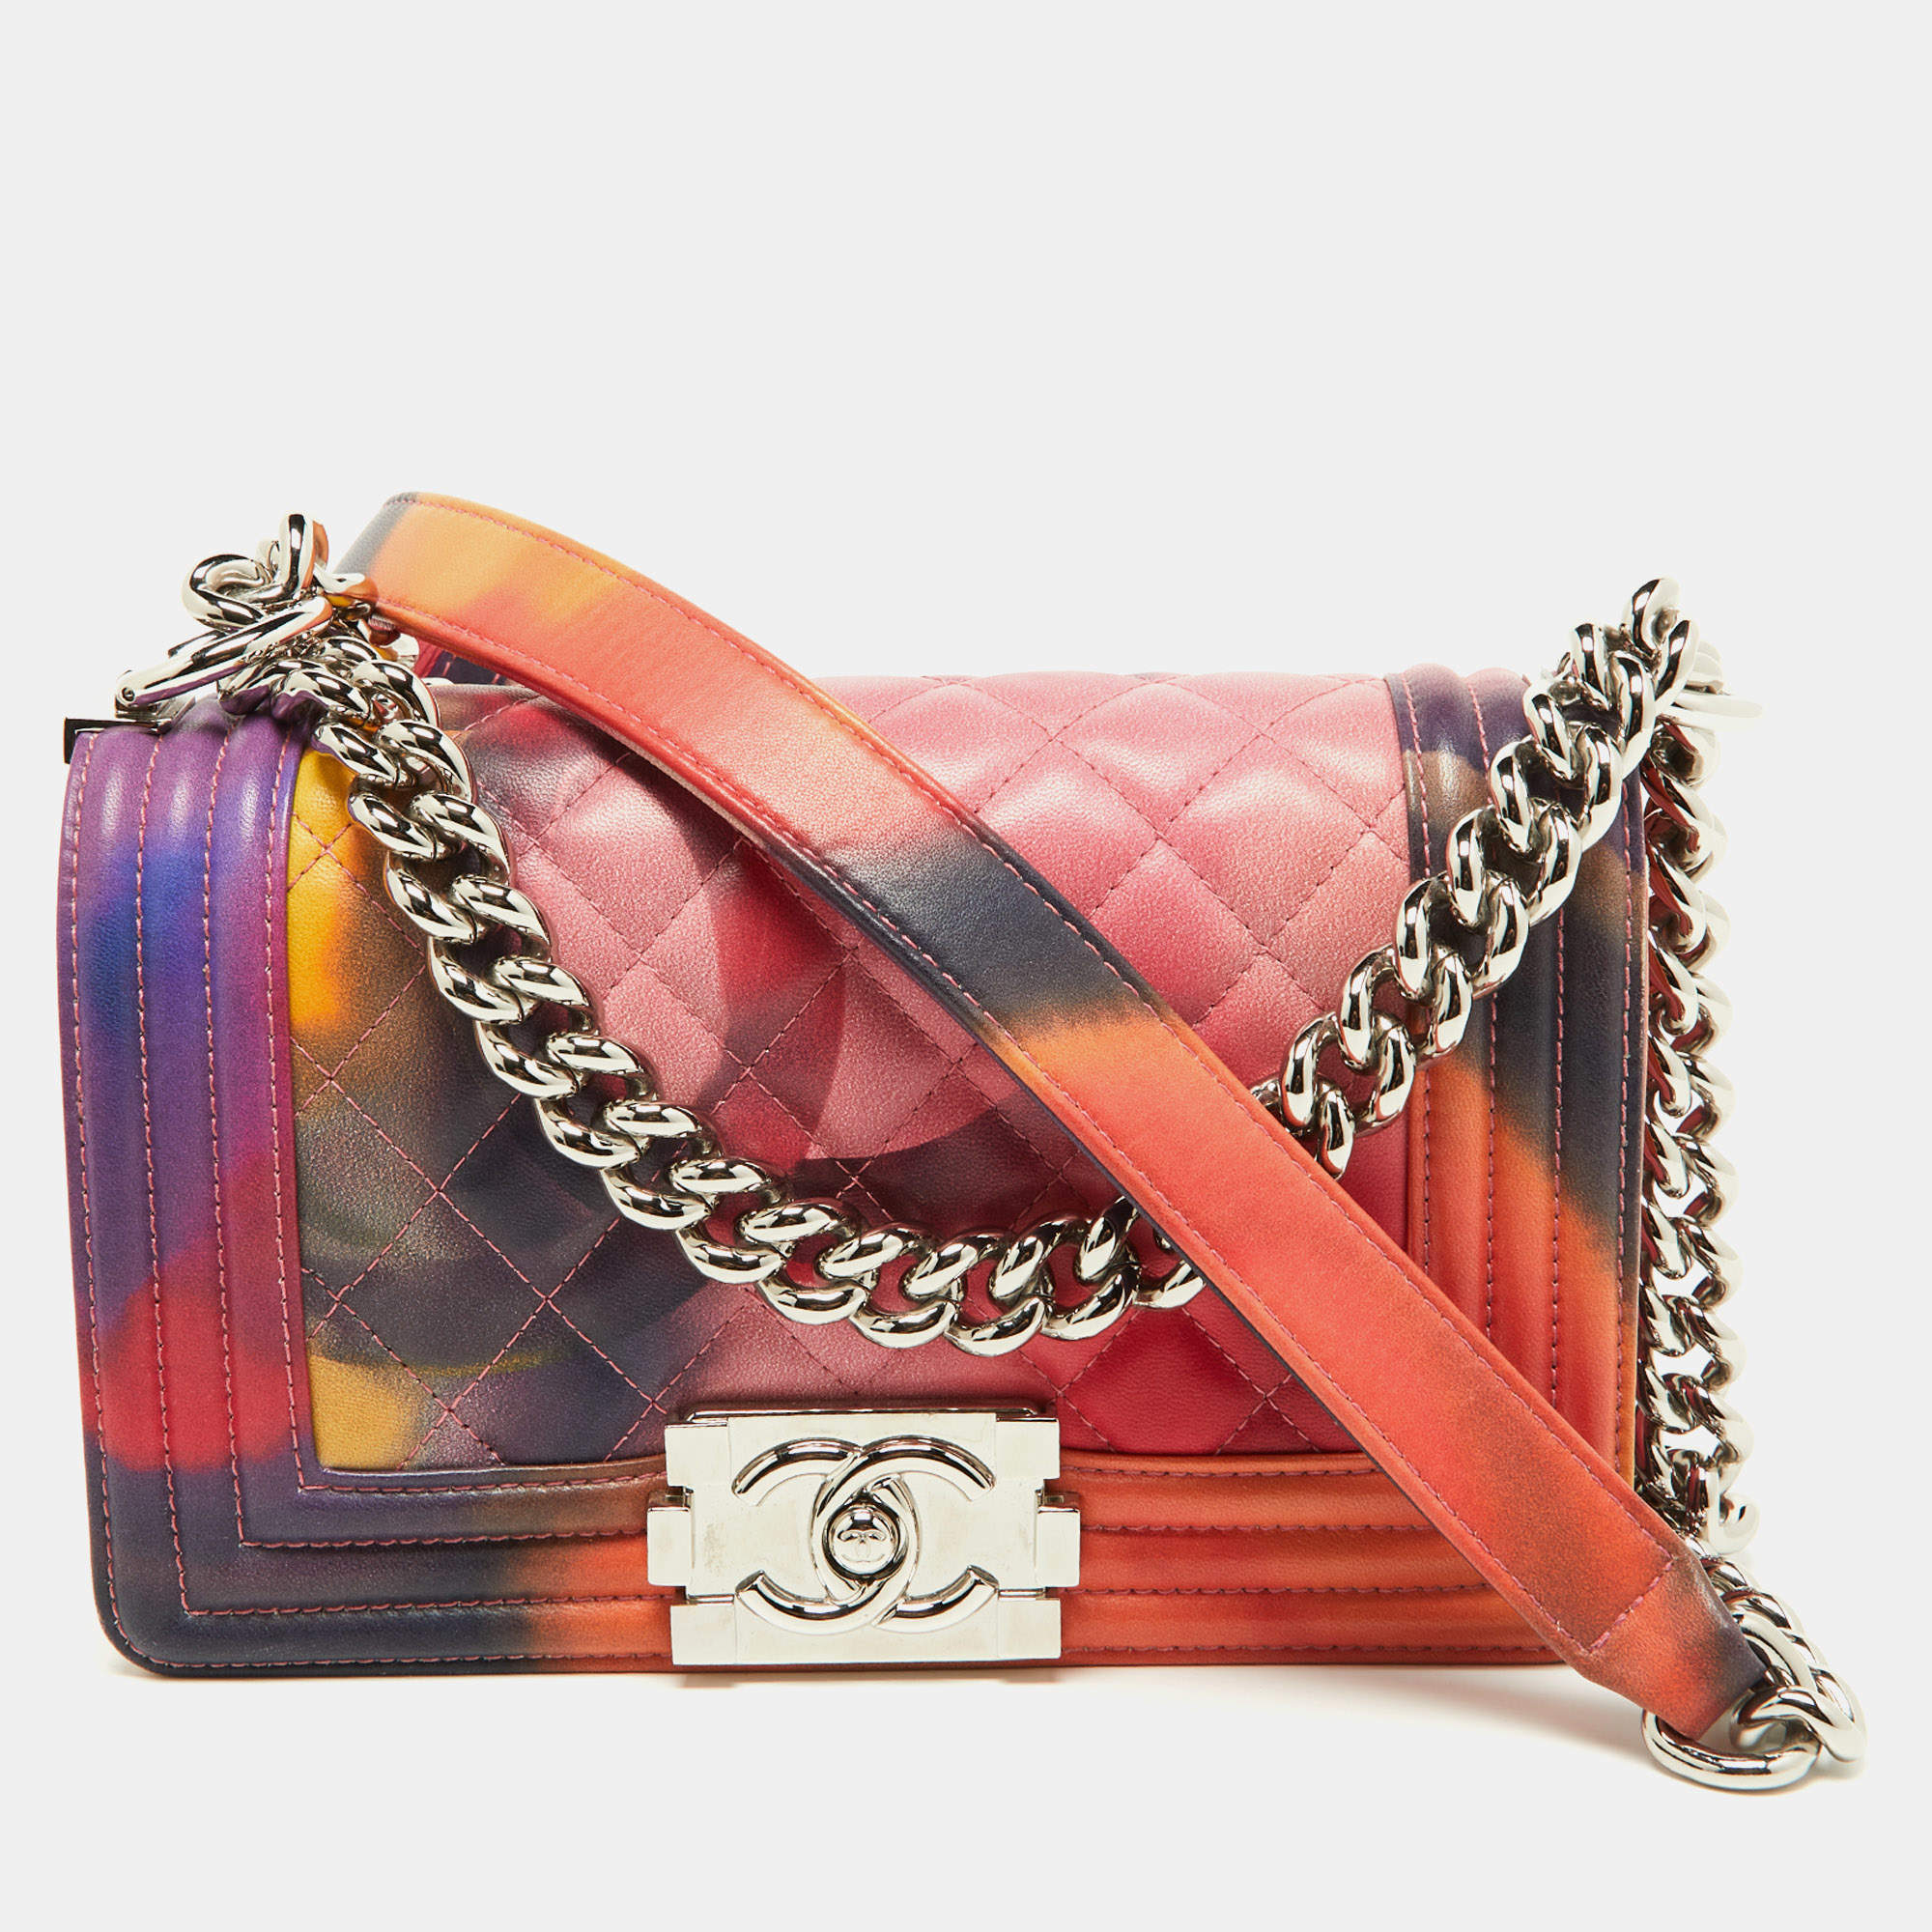 Chanel Multicolor Quilted Leather Small Flower Power Boy Bag Chanel